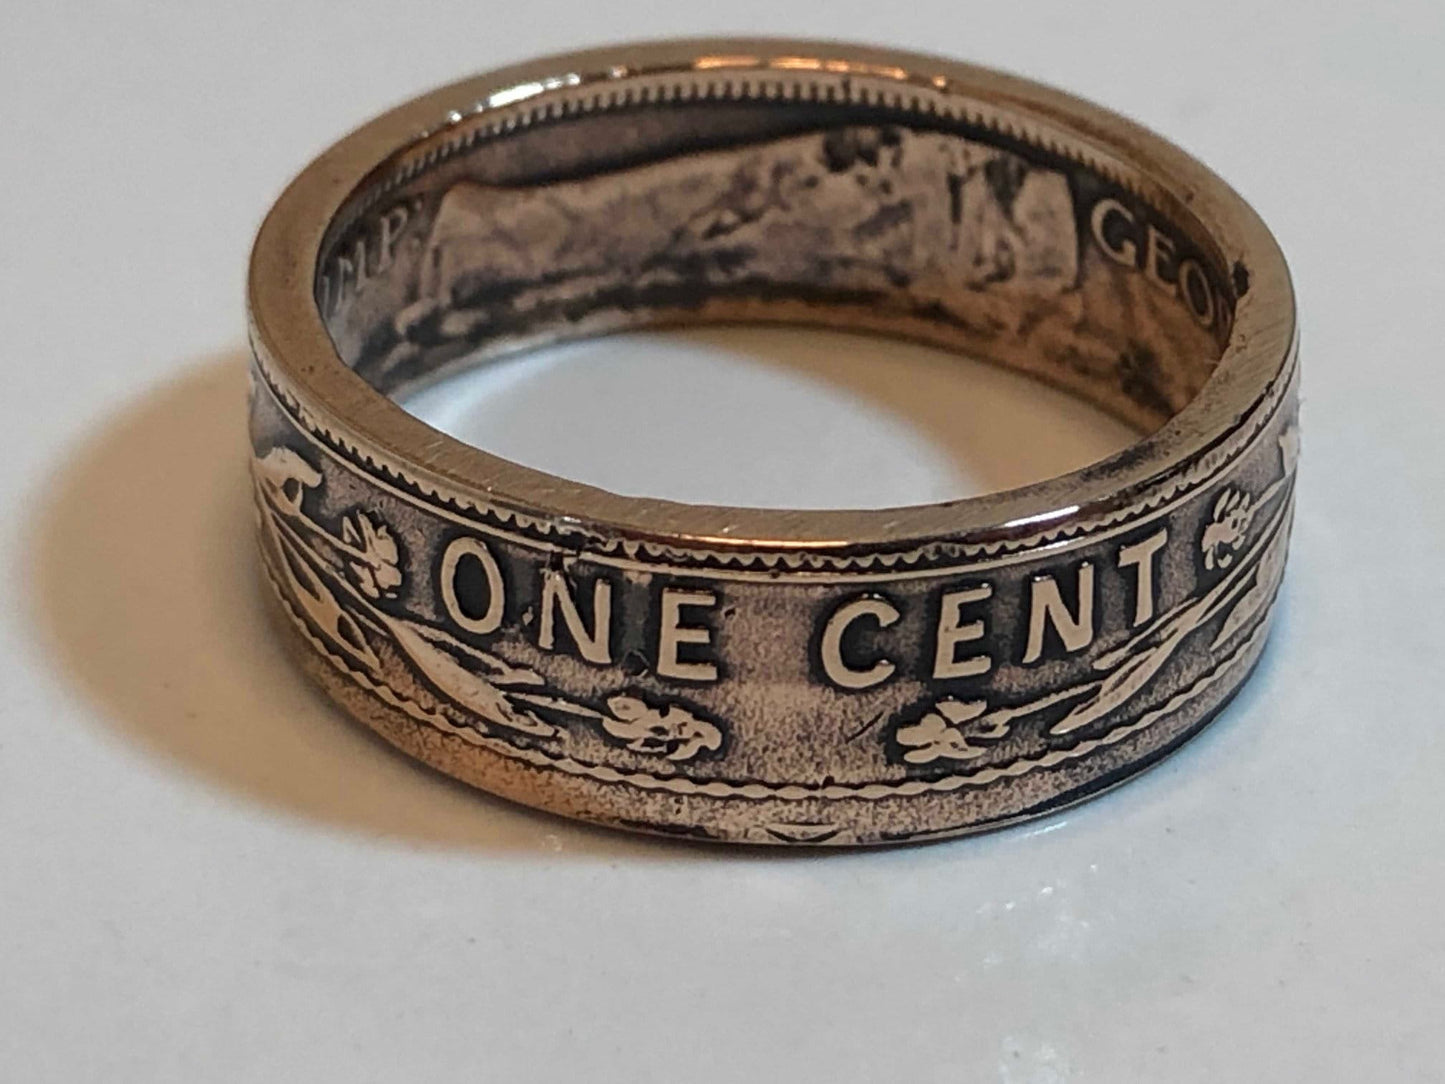 Canada NFLD Coin Ring Newfoundland Penny Canadian Ring Handmade Custom Ring Gift For Friend Coin Ring Gift For Him Her World Coin Collector